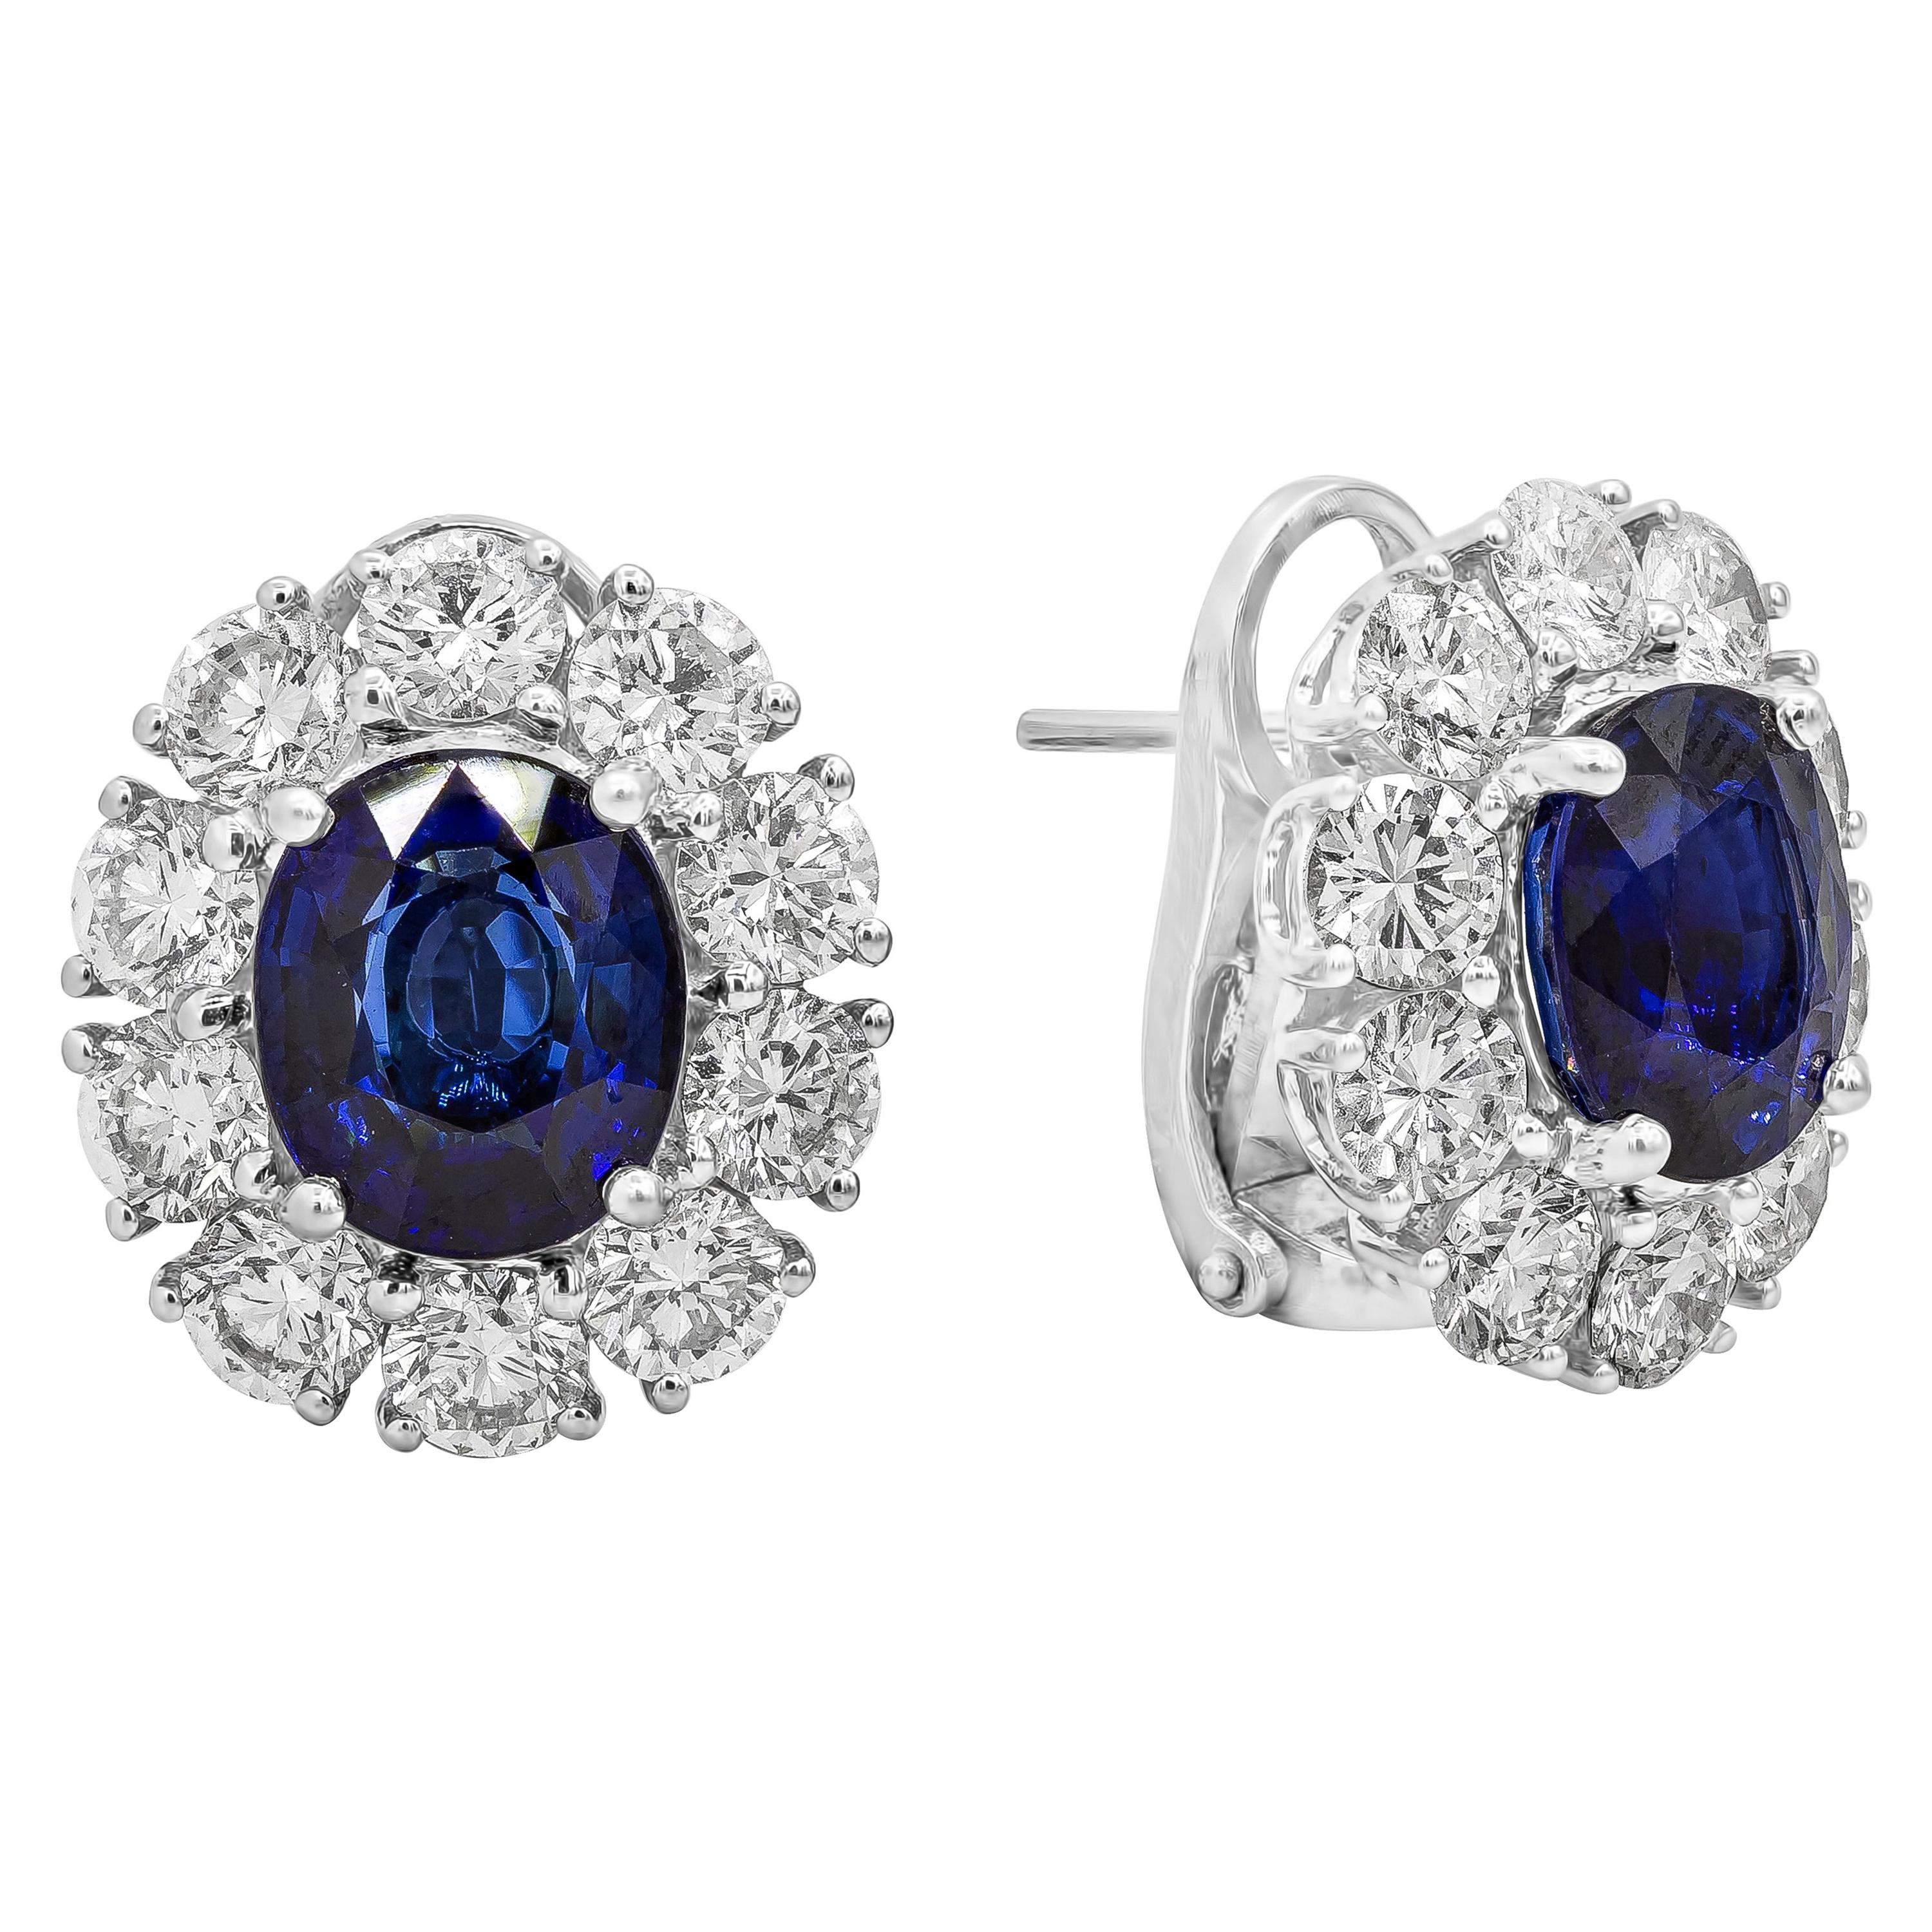 A unique pair of halo earrings showcasing two GIA certified heated blue sapphires from Madagascar weighing 6.05 carats total. Accented with a row of brilliant round diamonds weighing 4.27 carats total. Made in 18k White Gold. Omega Clip with